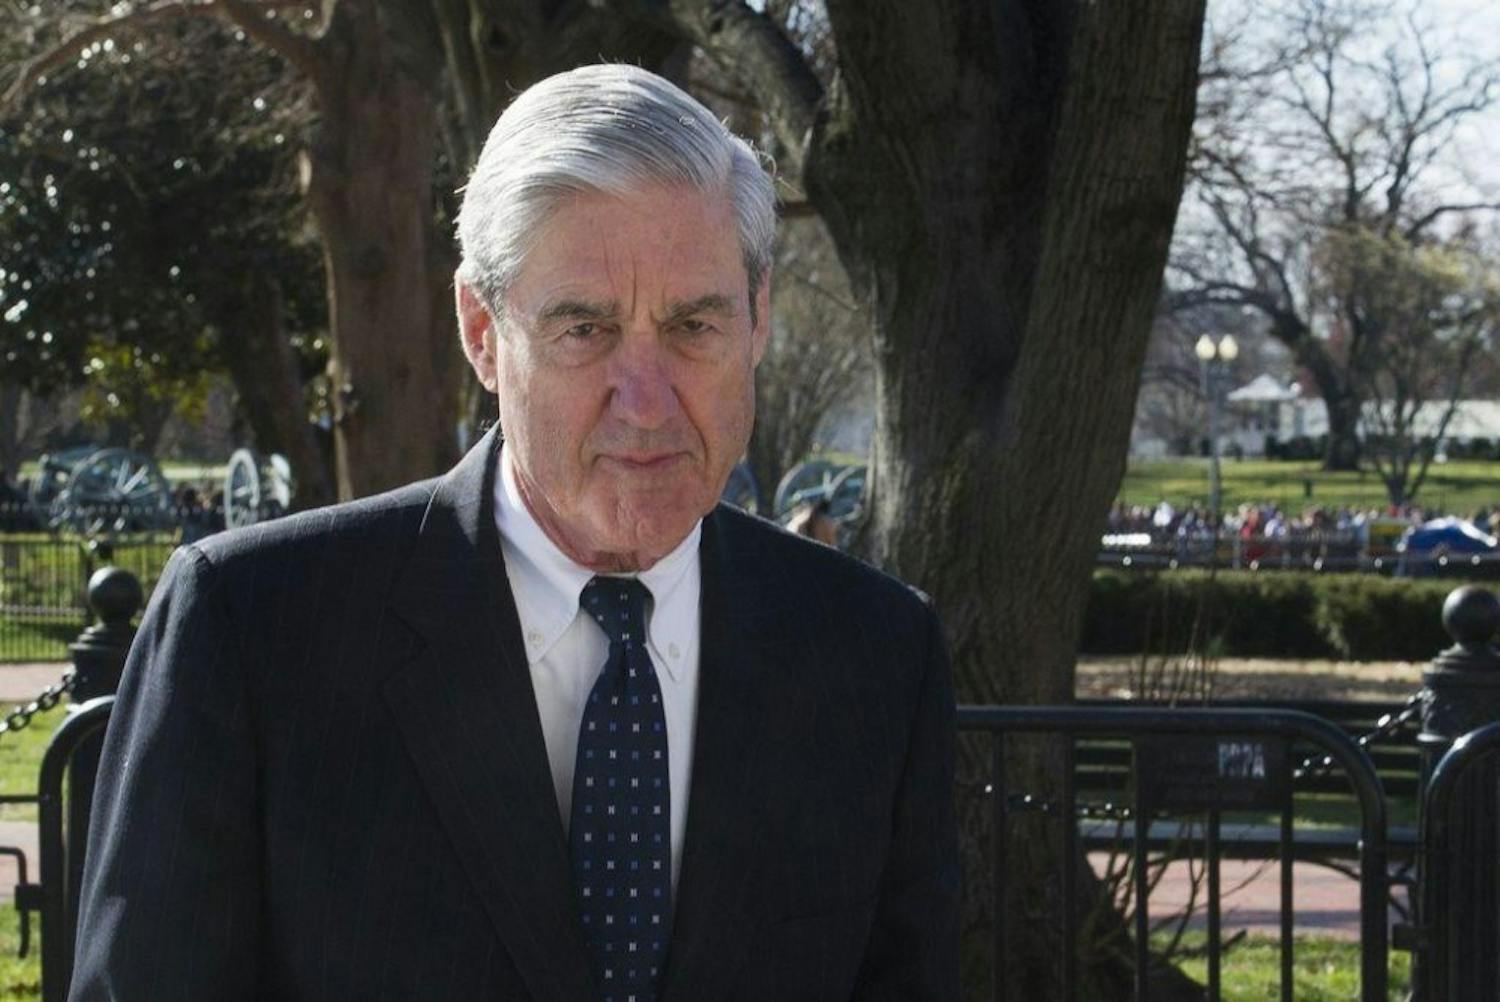 US-NEWS-MUELLER-SPECIAL-COUNSEL-PROBE-DID-AU.jpg